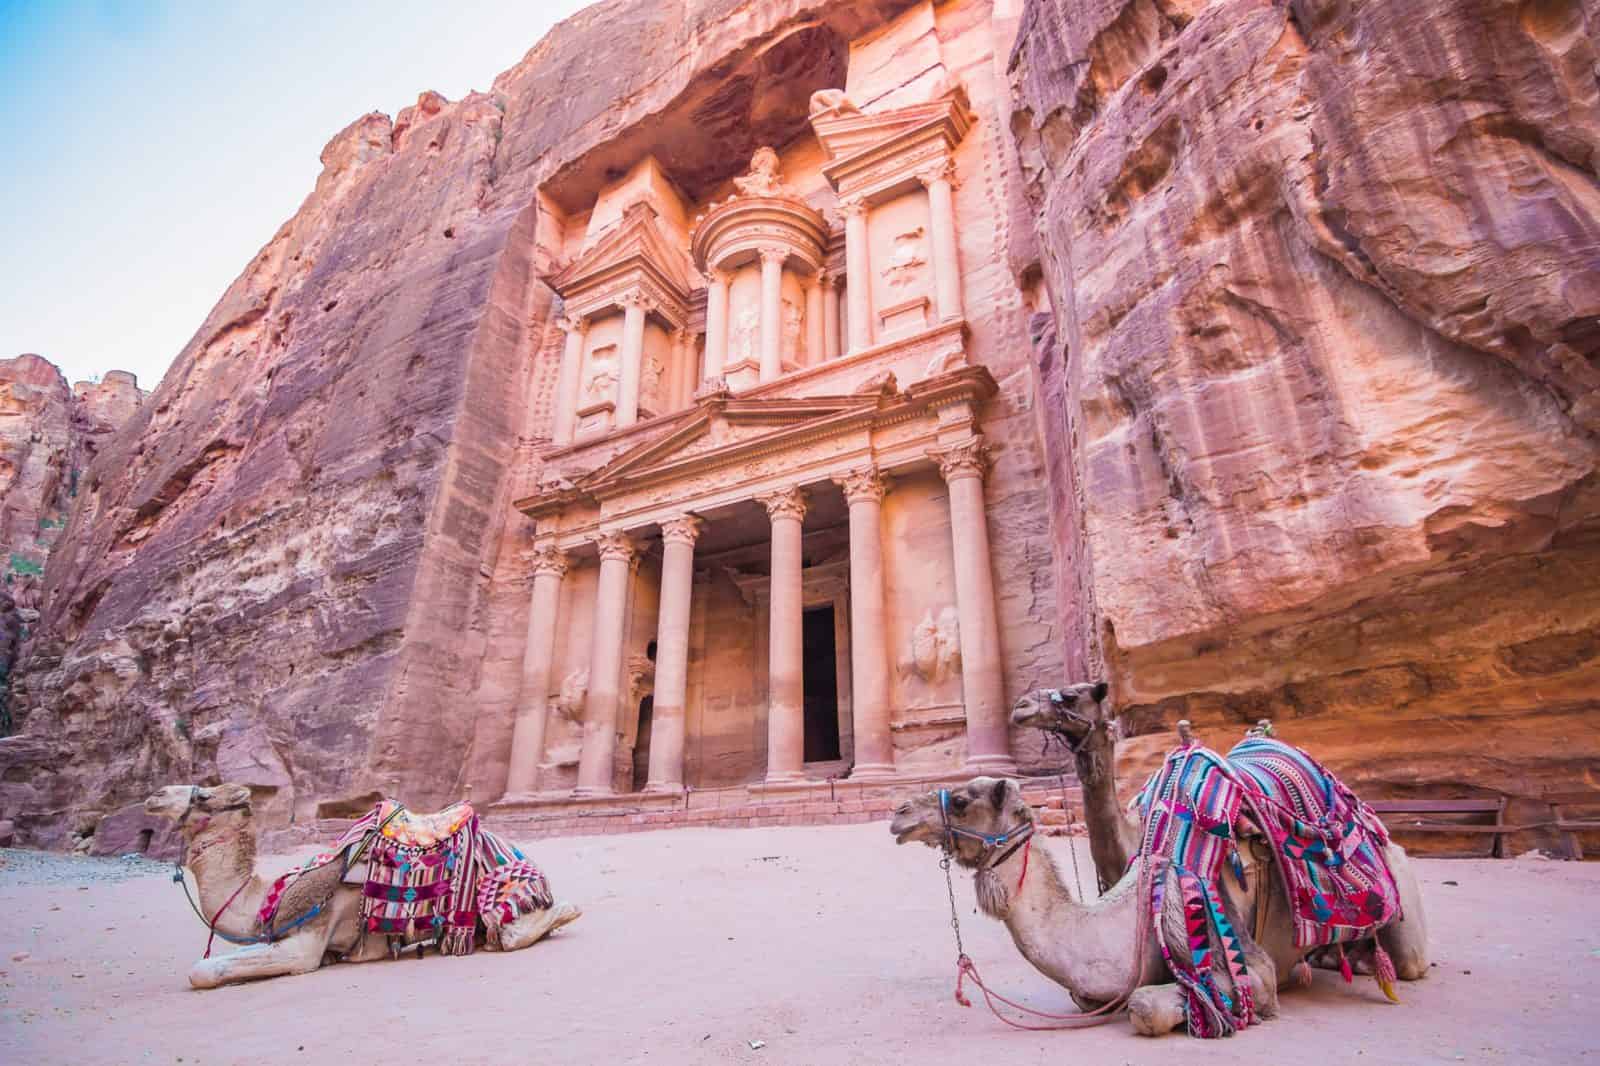 Camels in front of the Treasury in the ancient city of Petra